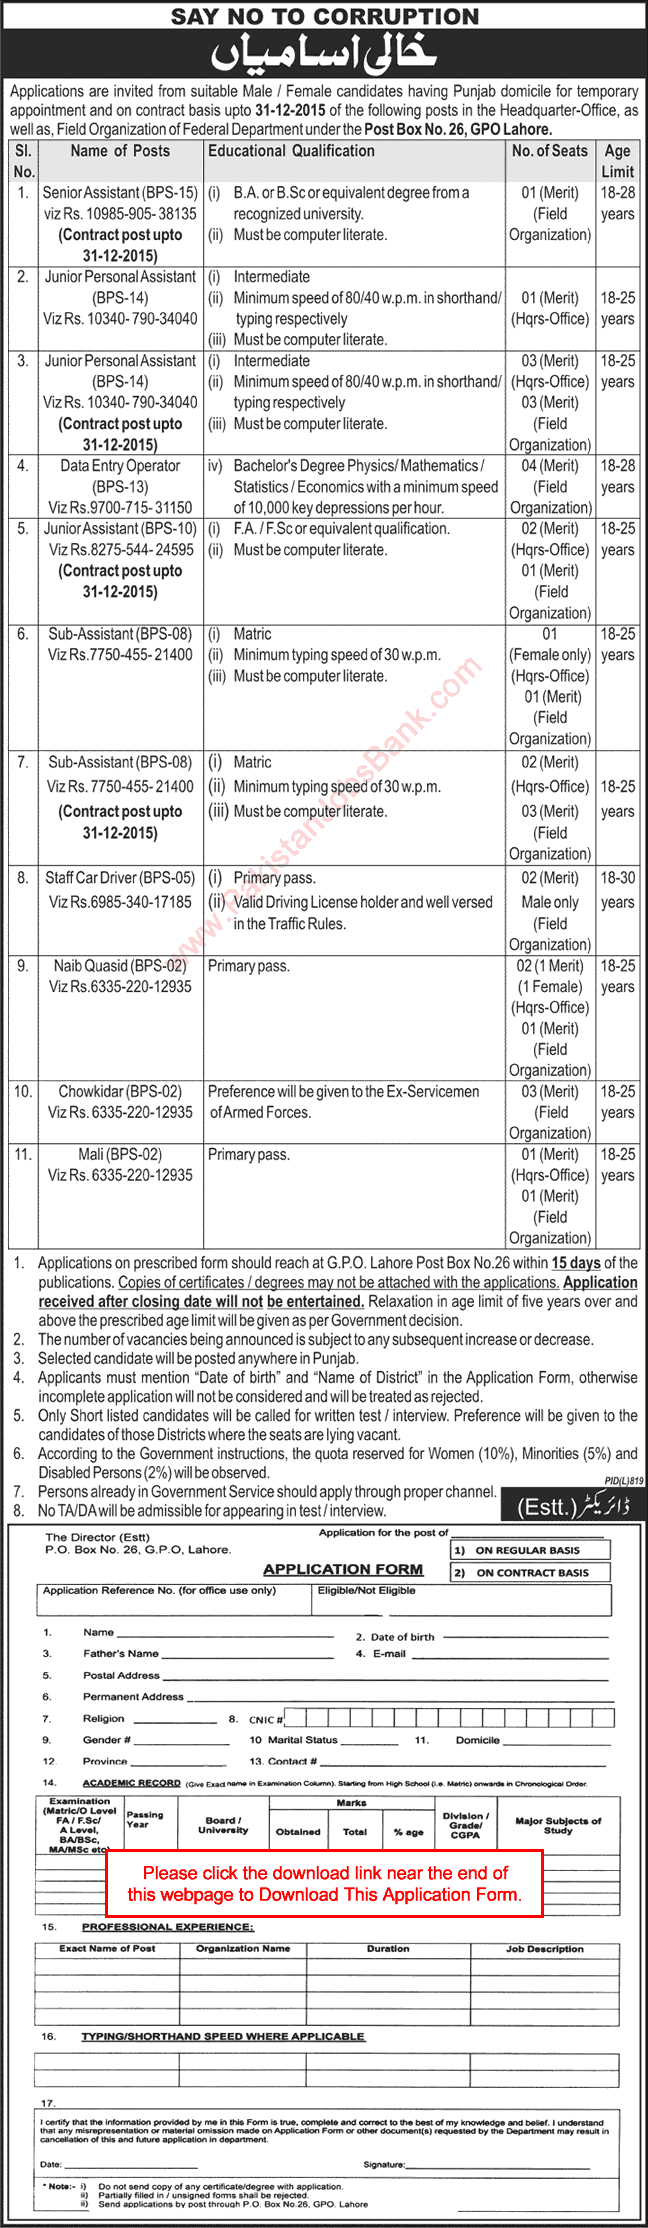 PO Box 26 GPO Lahore Jobs 2015 September Application Form Download Federal Department